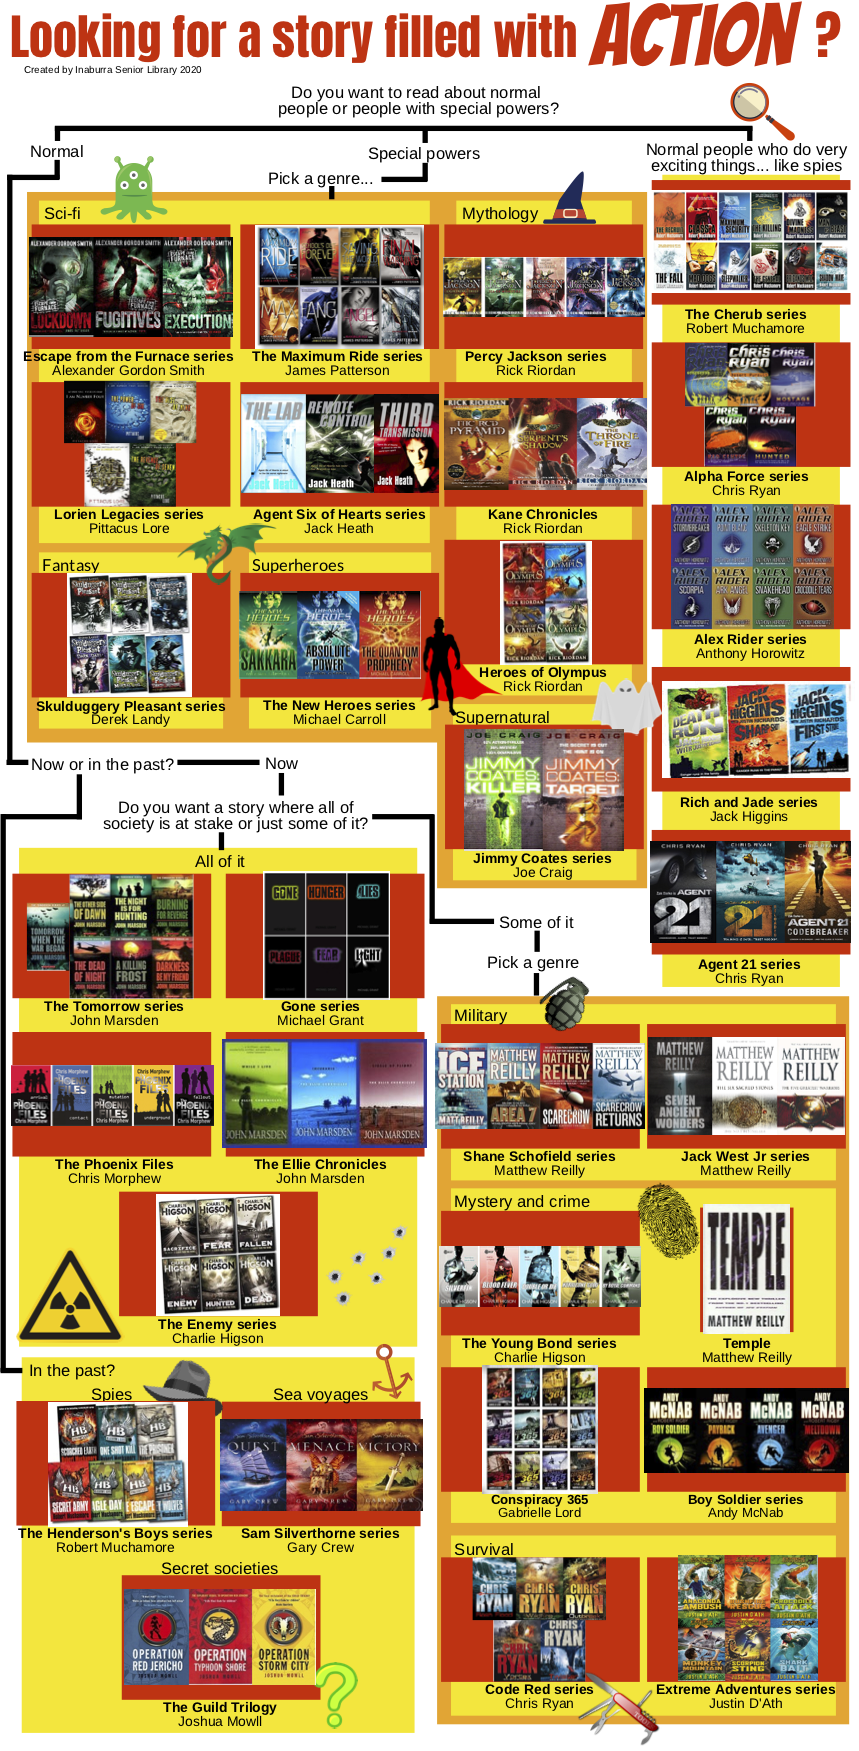 Action genre recommendations at Inaburra Senior Library